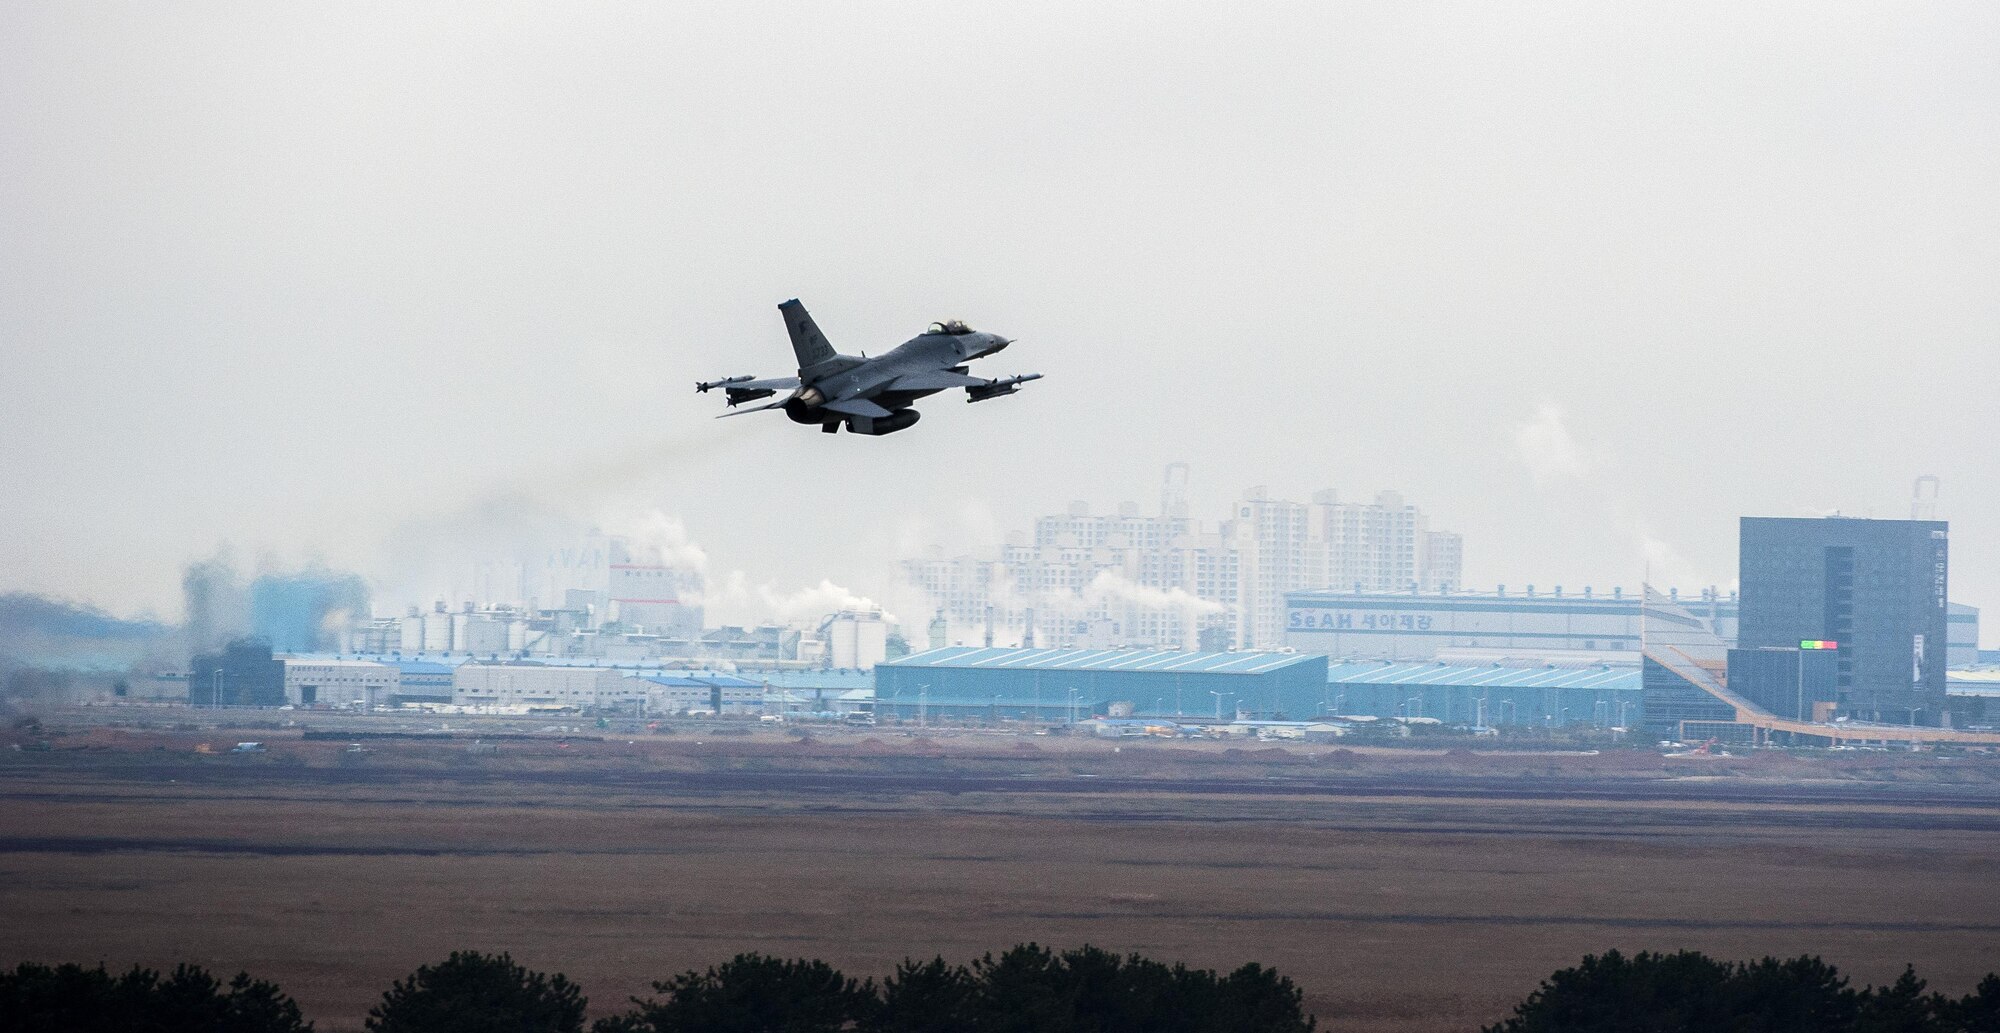 An F-16 Fighting Falcon from the 8th Fighter Wing takes off as part of Buddy Wing 15-7 at Kunsan Air Base, Republic of Korea, Nov. 19, 2015. Buddy Wing is part of a combined fighter exchange program designed to improve interoperability between U.S. Air Force and ROKAF fighter squadrons and are conducted multiple times throughout the year in order to promote cultural awareness and sharpen combined combat capabilities. (U.S. Air Force photo by Staff Sgt. Nick Wilson/Released)